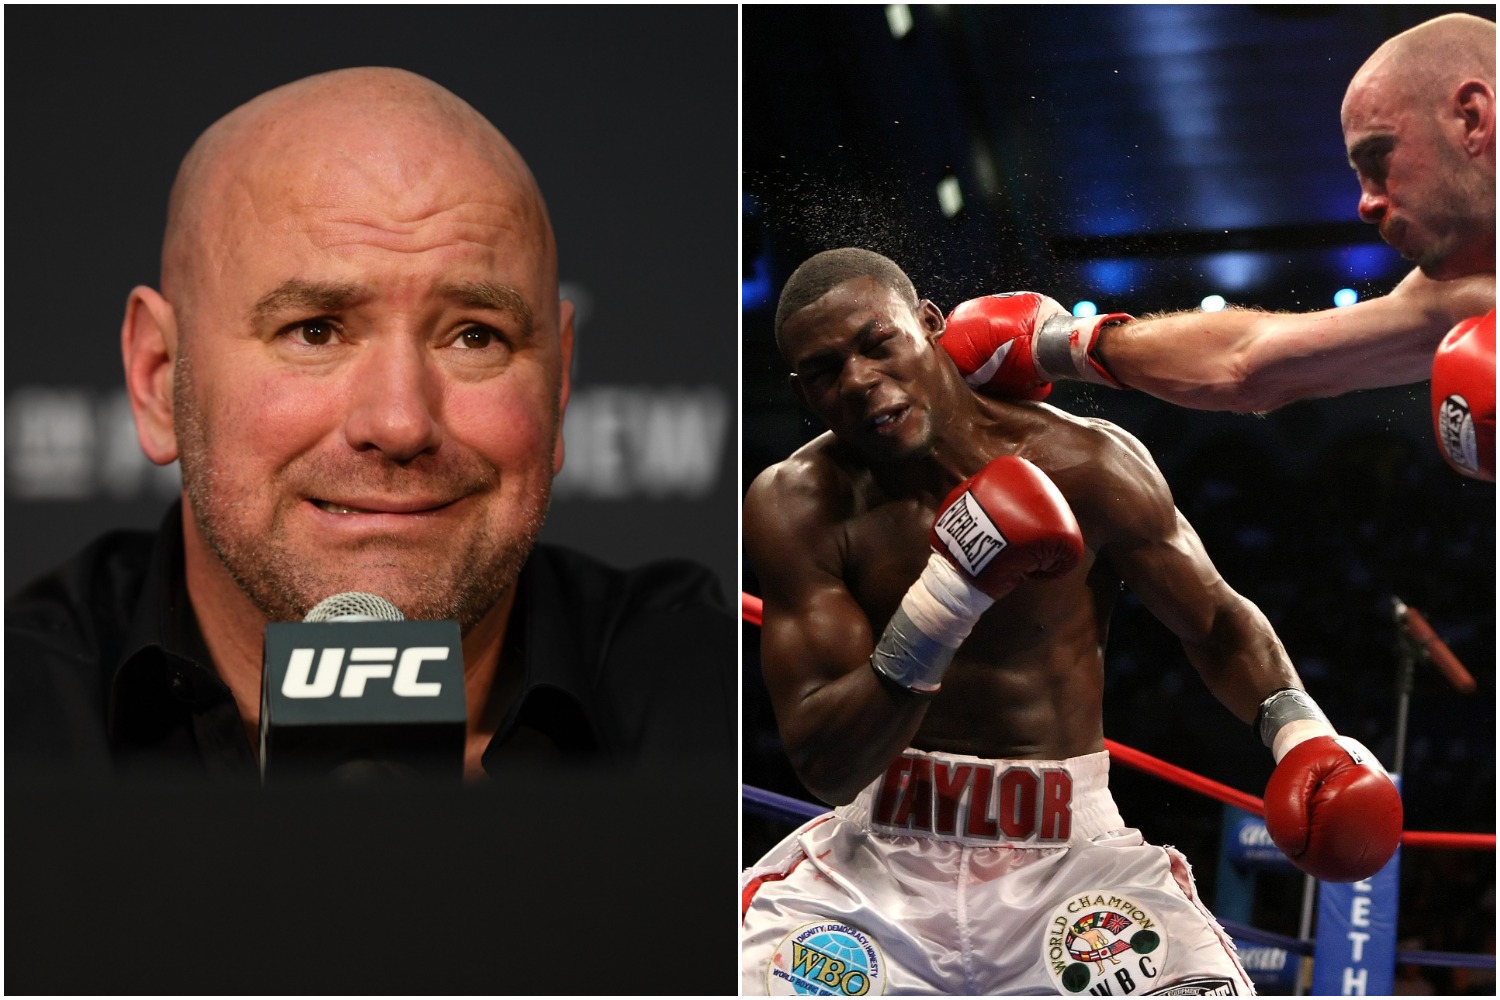 UFC president Dana White sits at the microphone as former boxing champion Jermain Taylor gets punched in the head in a fight against Kelly Pavlik.